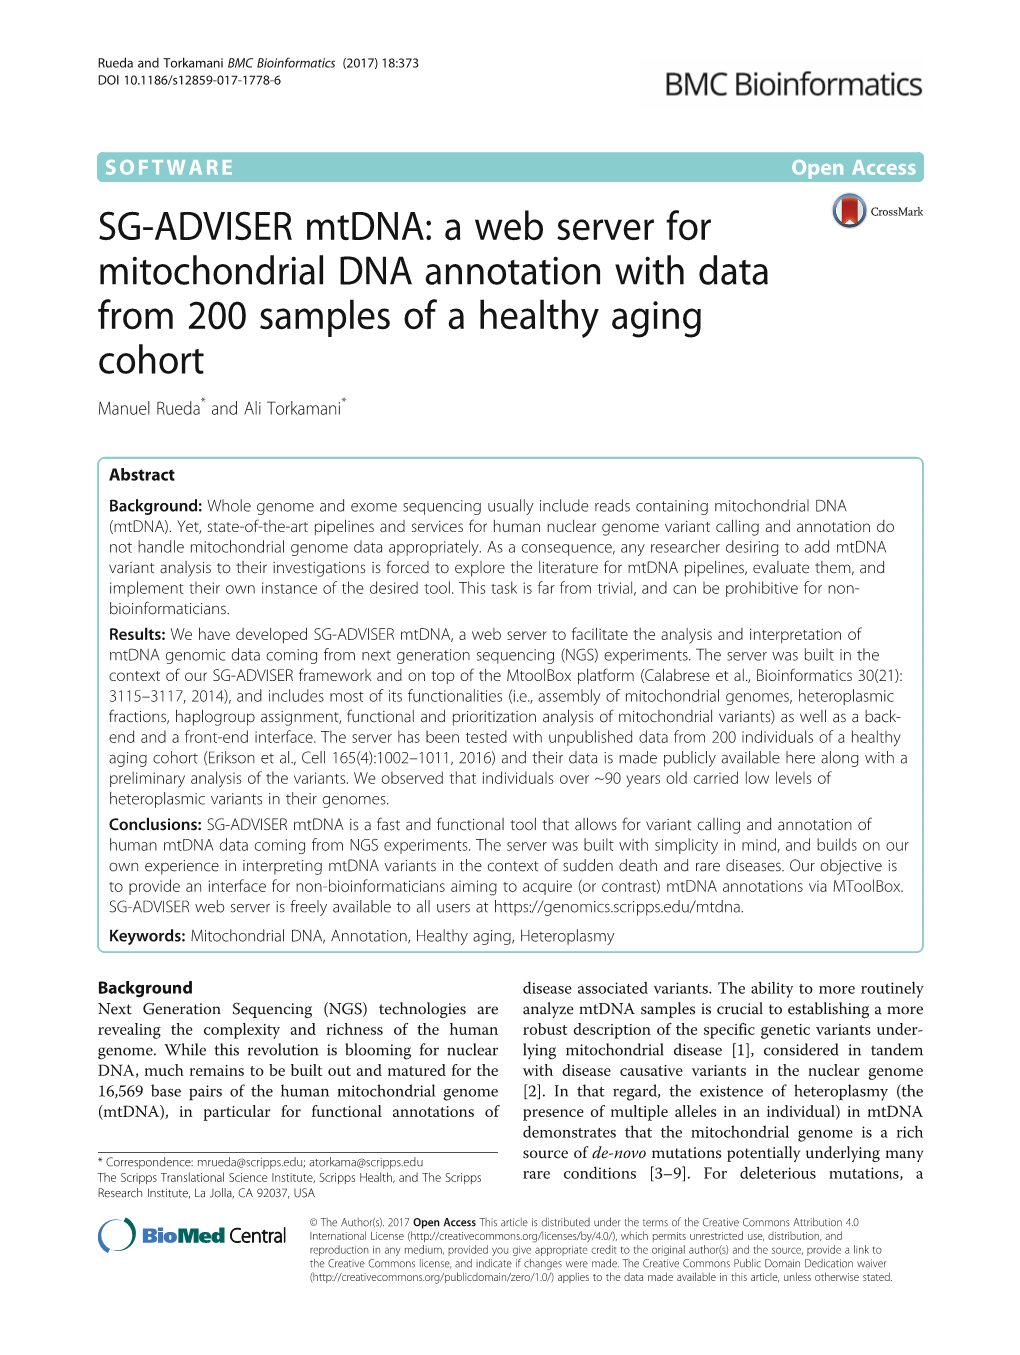 SG-ADVISER Mtdna: a Web Server for Mitochondrial DNA Annotation with Data from 200 Samples of a Healthy Aging Cohort Manuel Rueda* and Ali Torkamani*